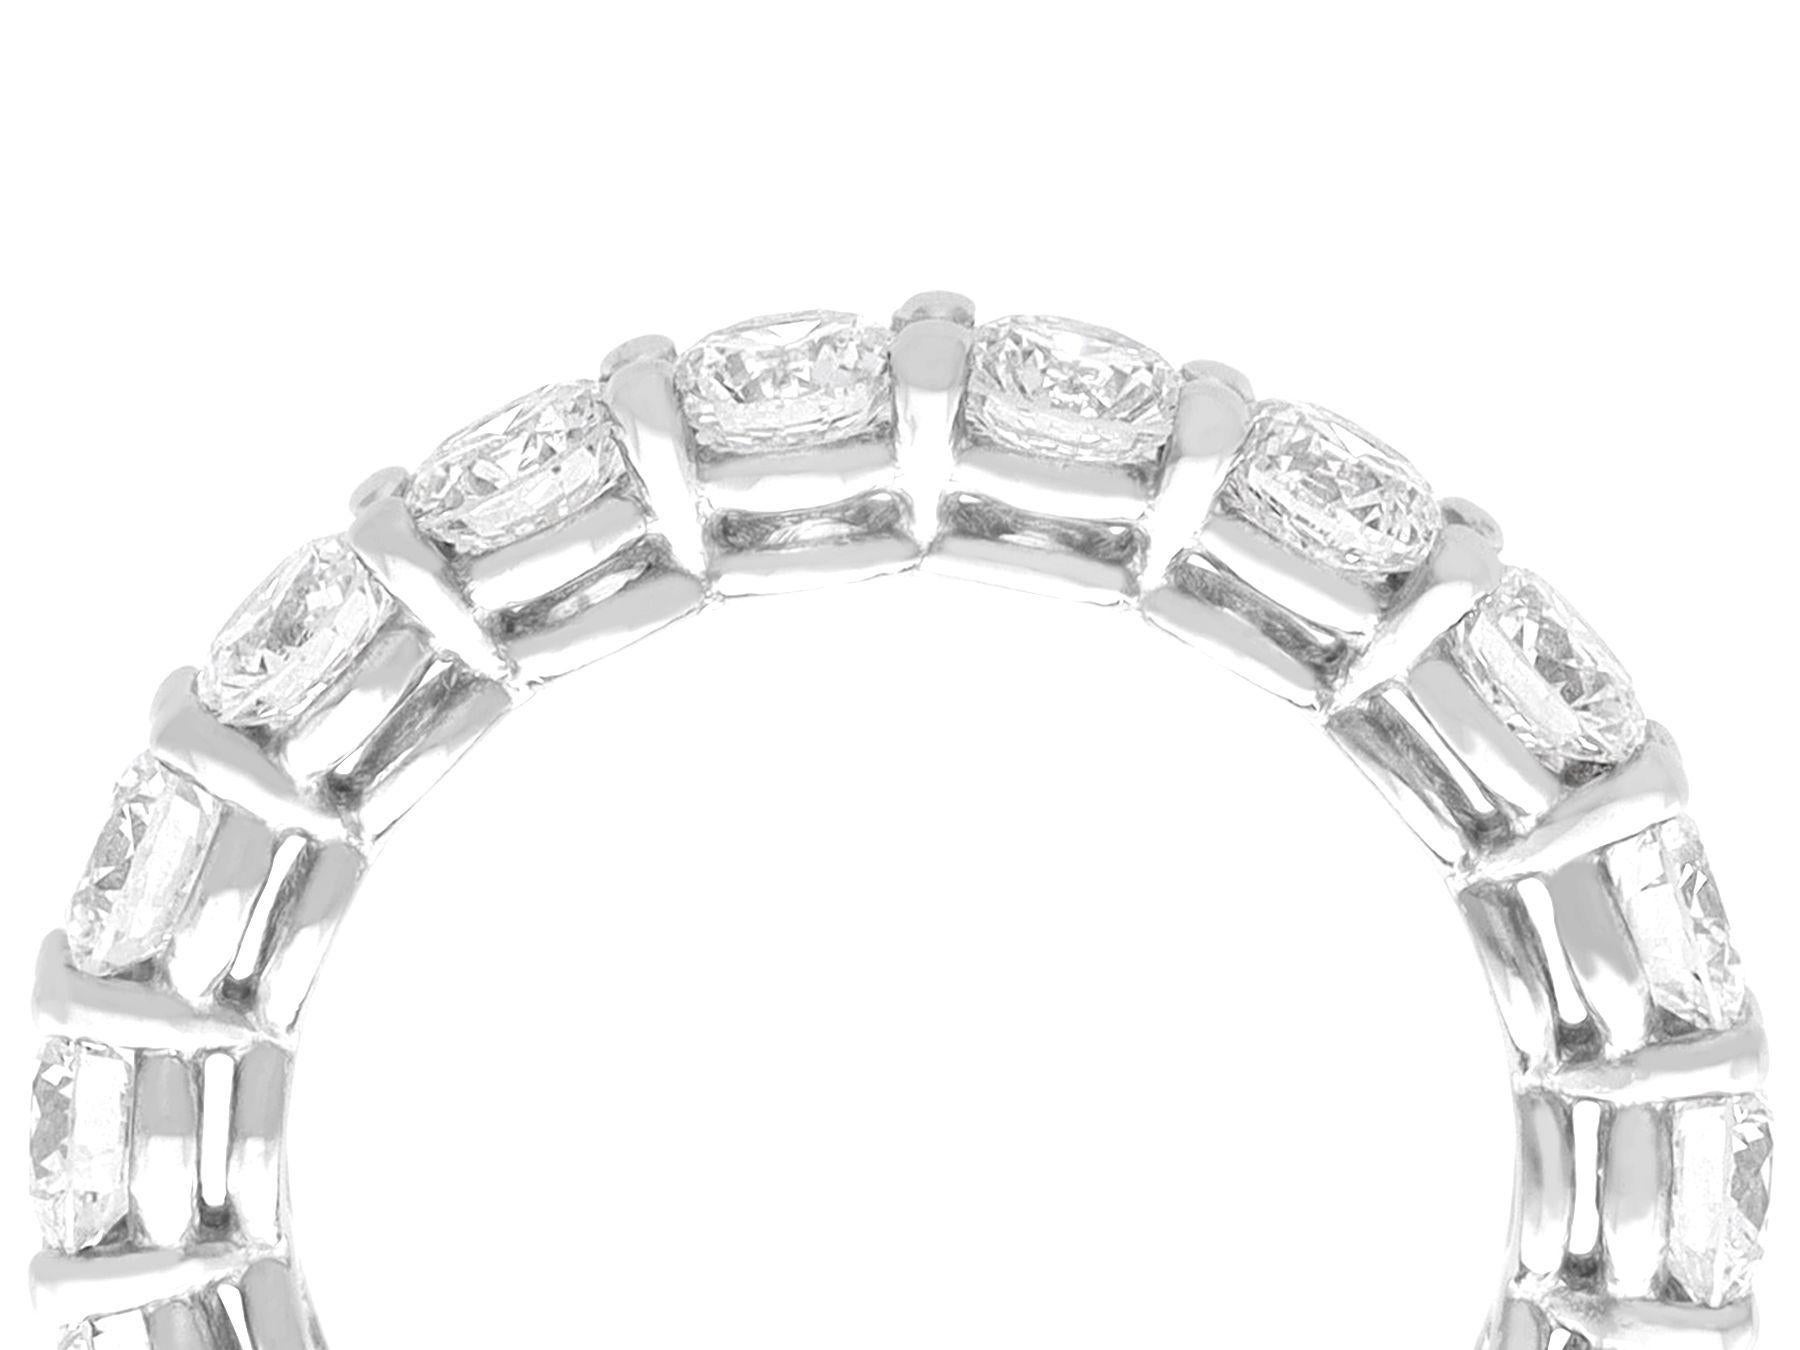 A stunning, fine and impressive vintage 1980s 2.77 carat diamond and platinum full eternity ring; part of our diverse diamond jewelry and estate jewelry collections.

This stunning, fine and impressive vintage diamond eternity ring has been crafted